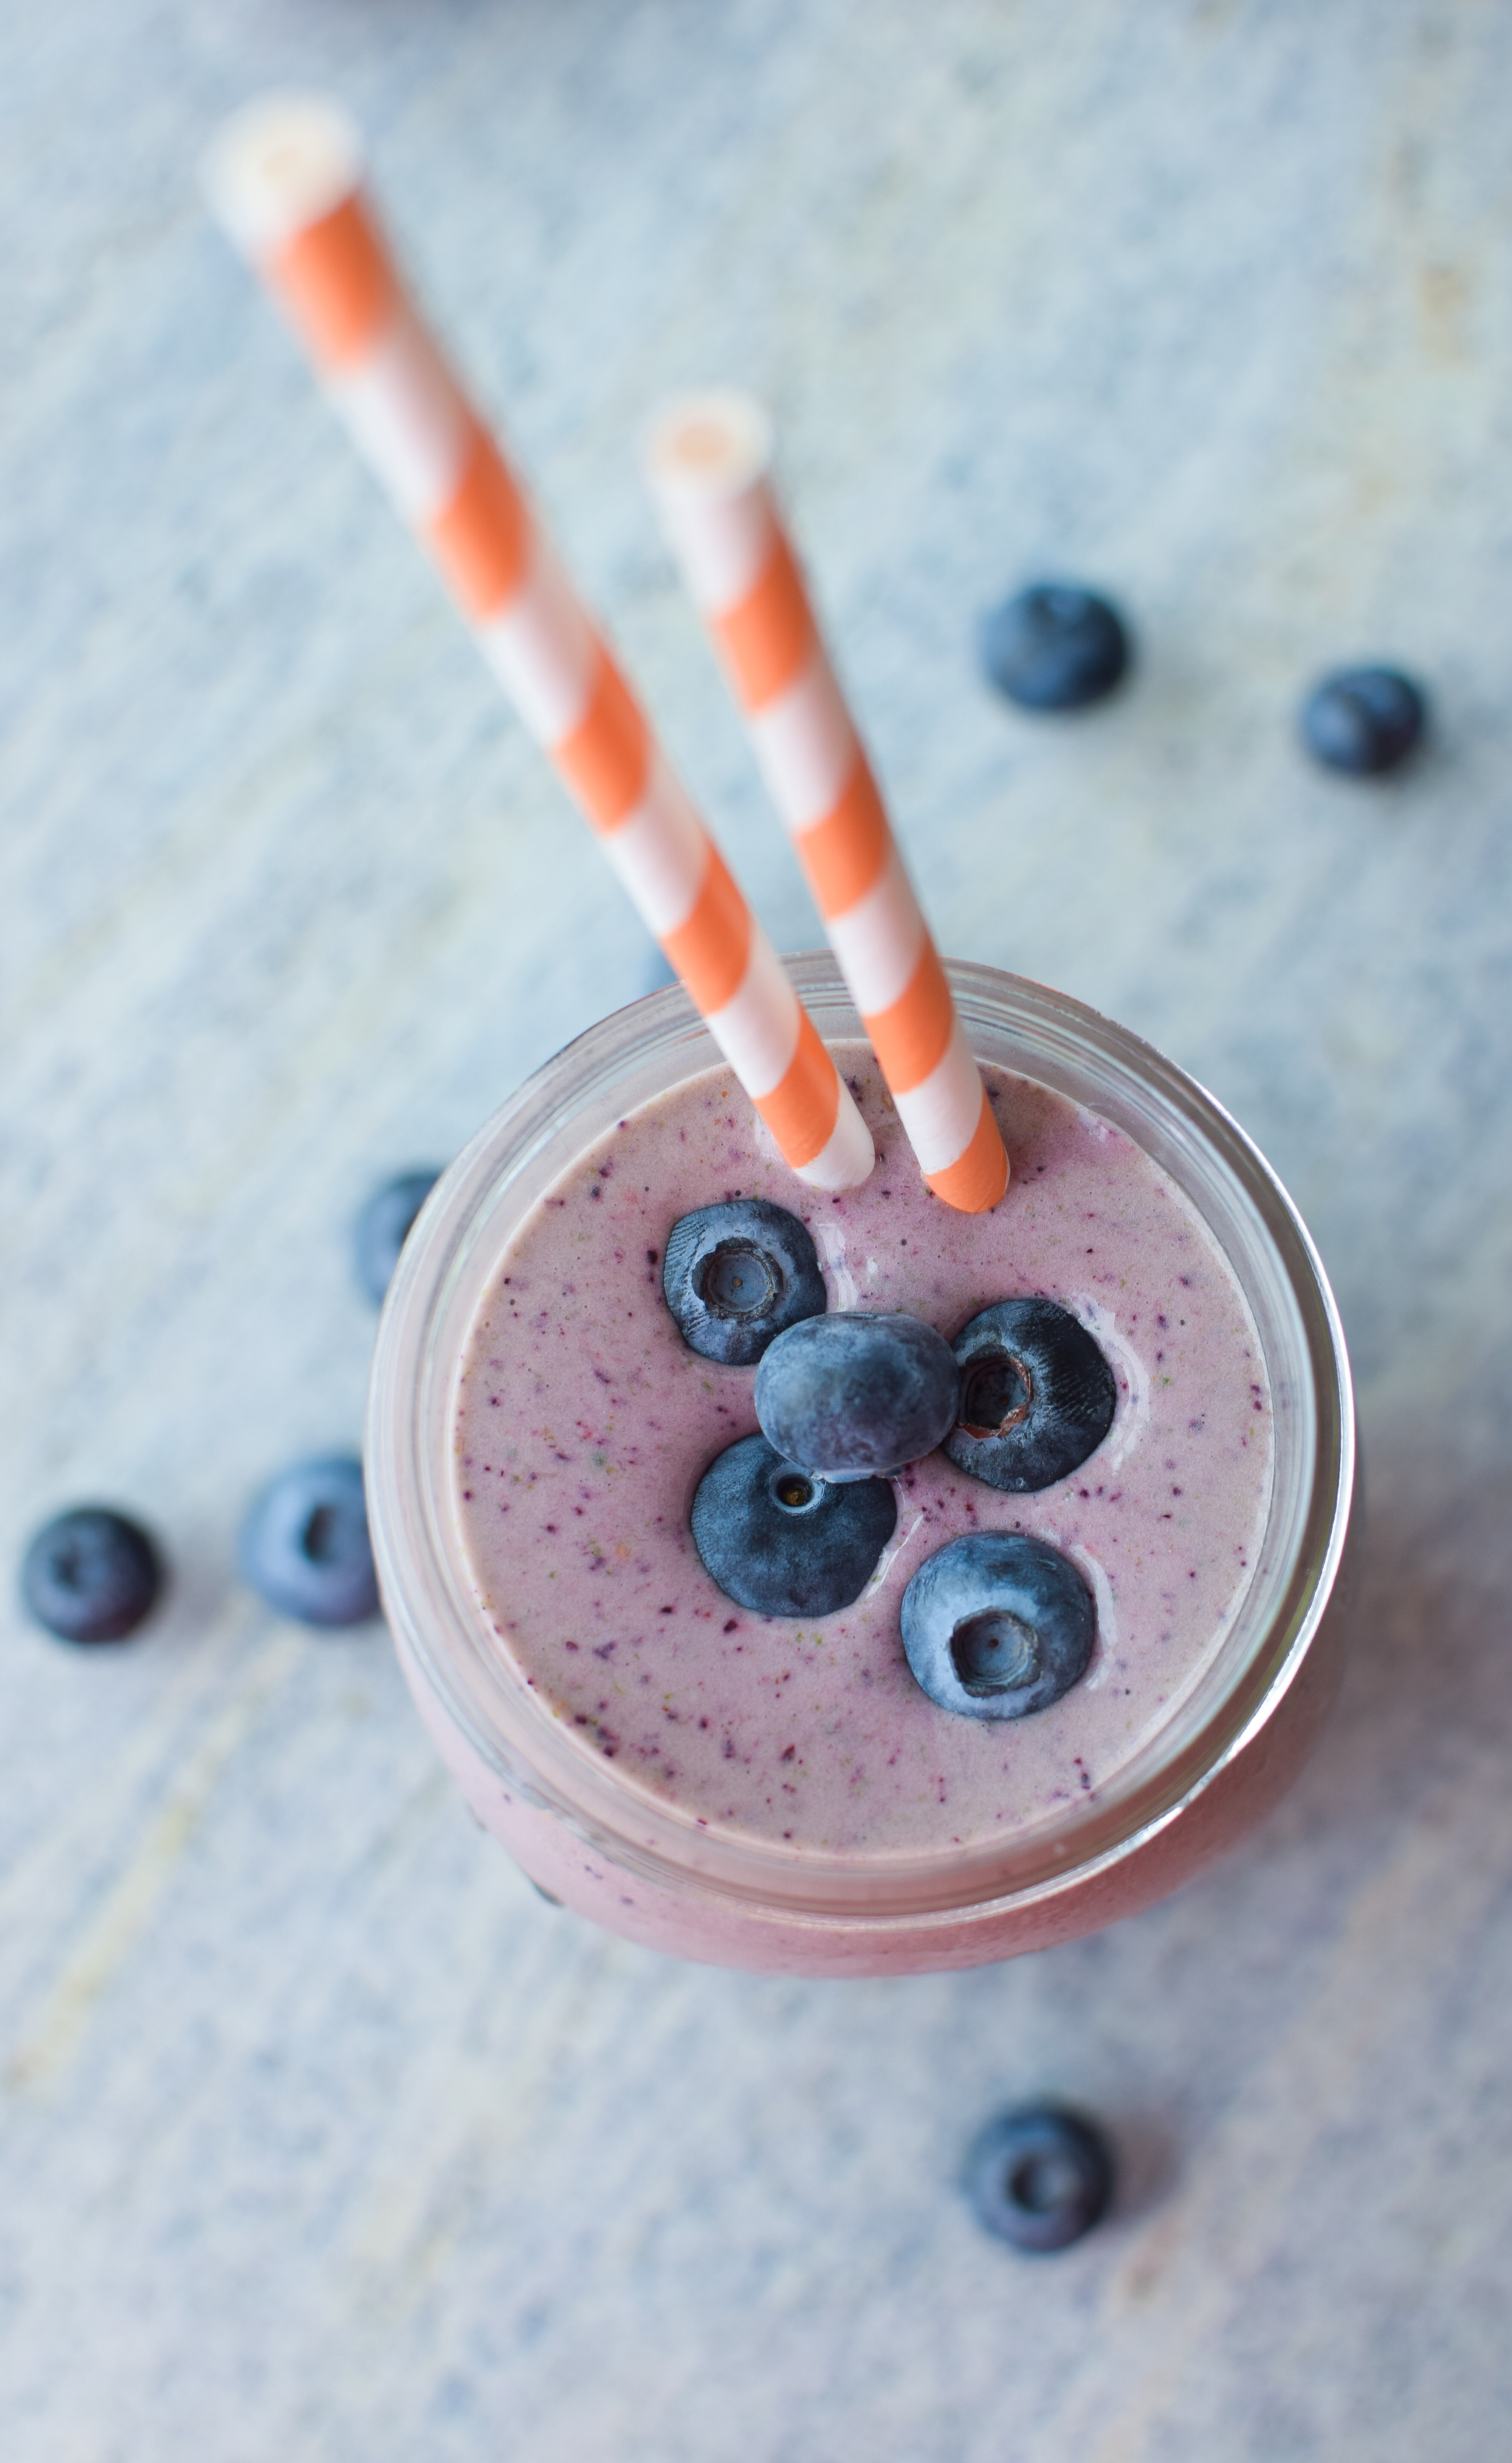 Our very favorite go-to Berry Protein Smoothies recipe in two ways! Packed with berries, greens, and protein, and super easy for meal prepping! - ProjectMealPlan.com